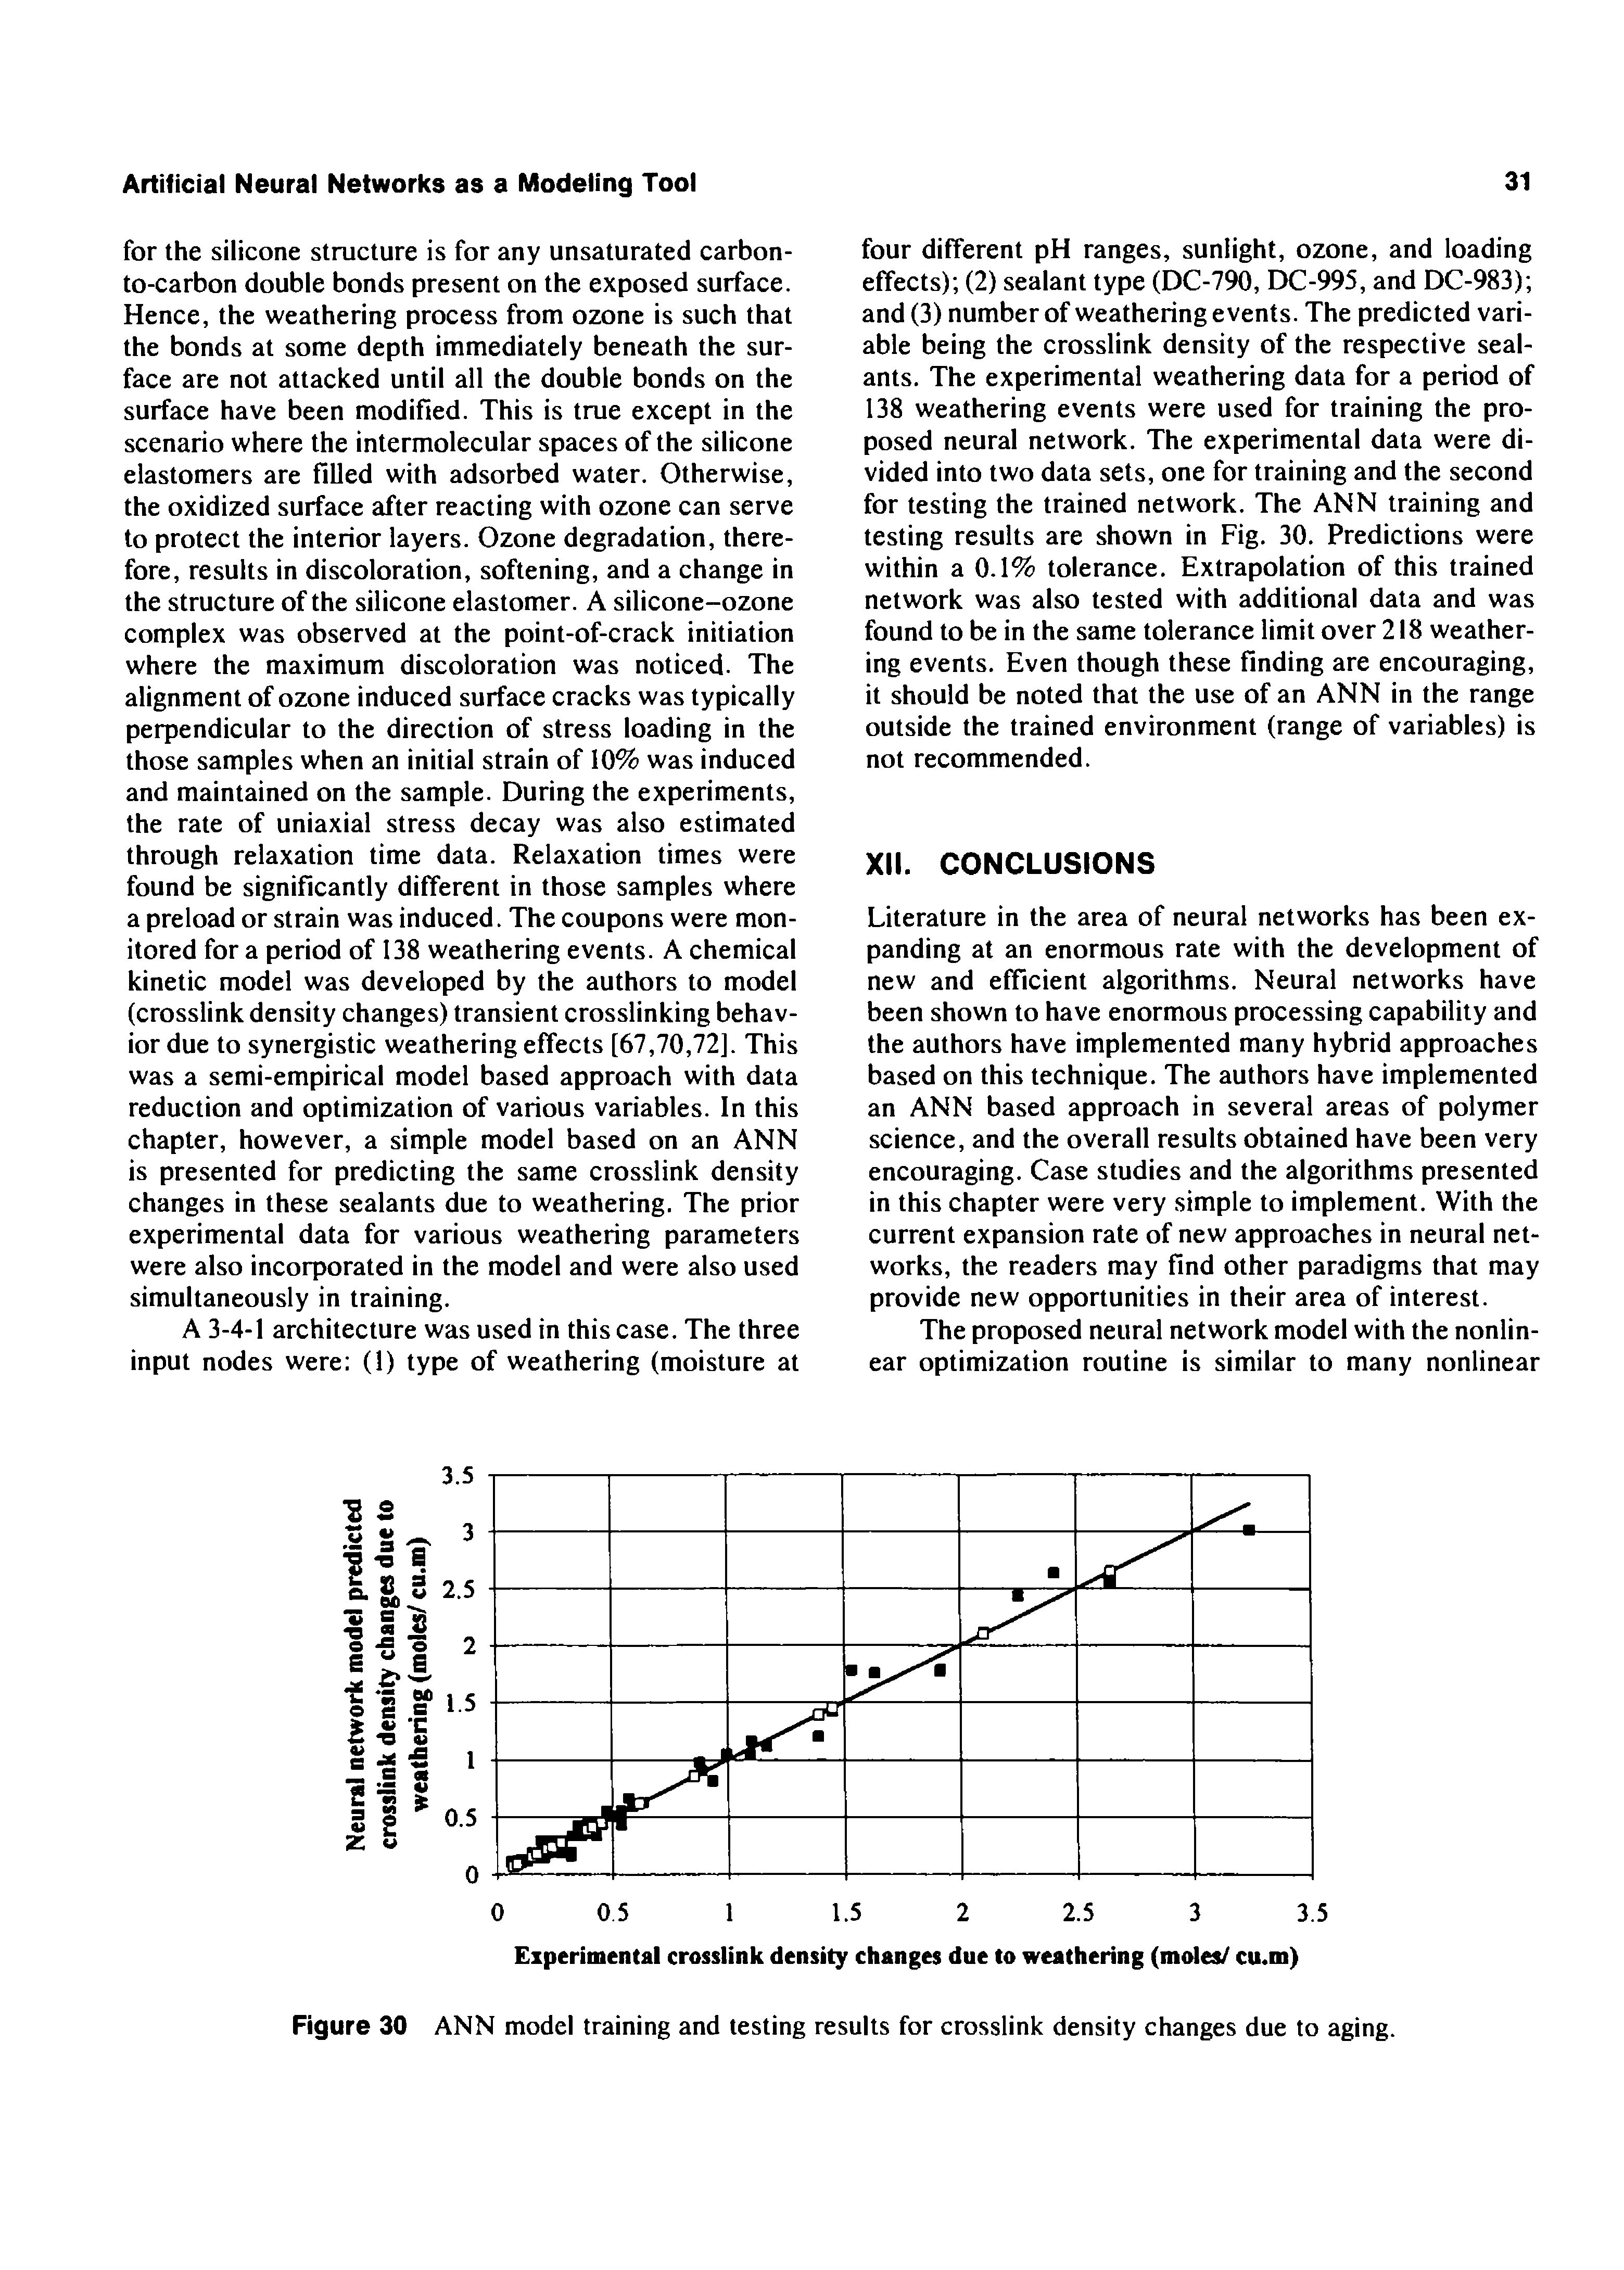 Figure 30 ANN model training and testing results for crosslink density changes due to aging.